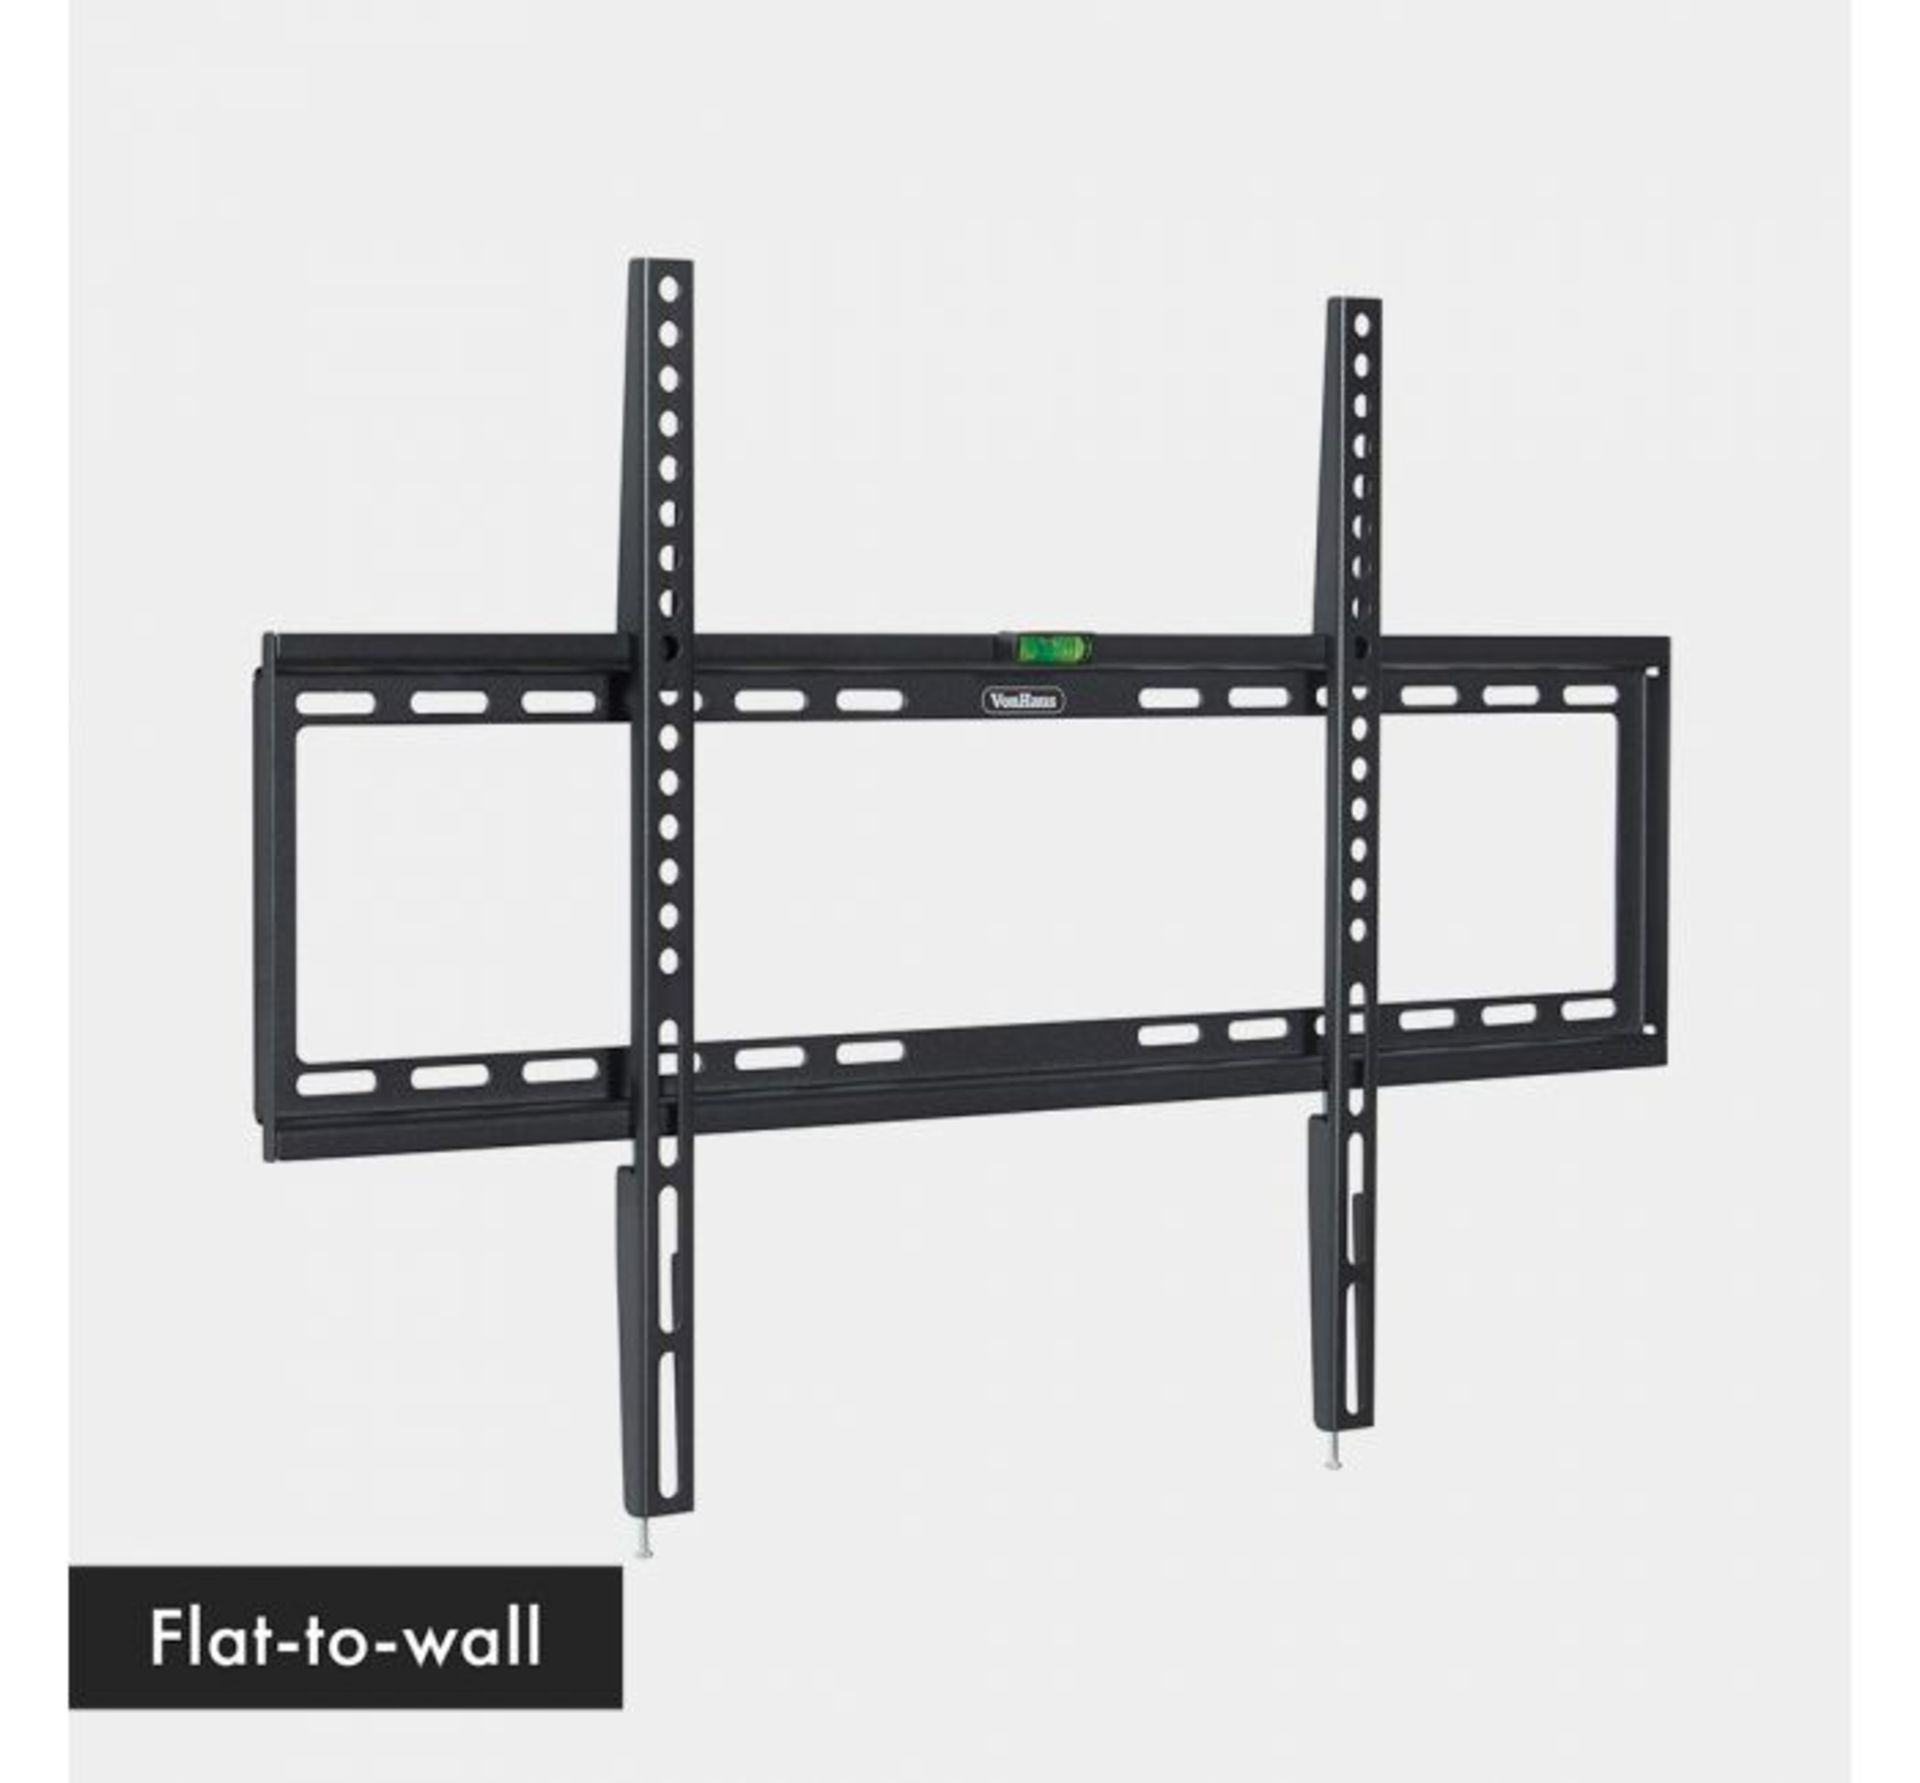 (OM23) 37-70 inch Flat-to-wall TV bracket Please confirm your TV’s VESA Mounting Dimensions a... - Image 2 of 2